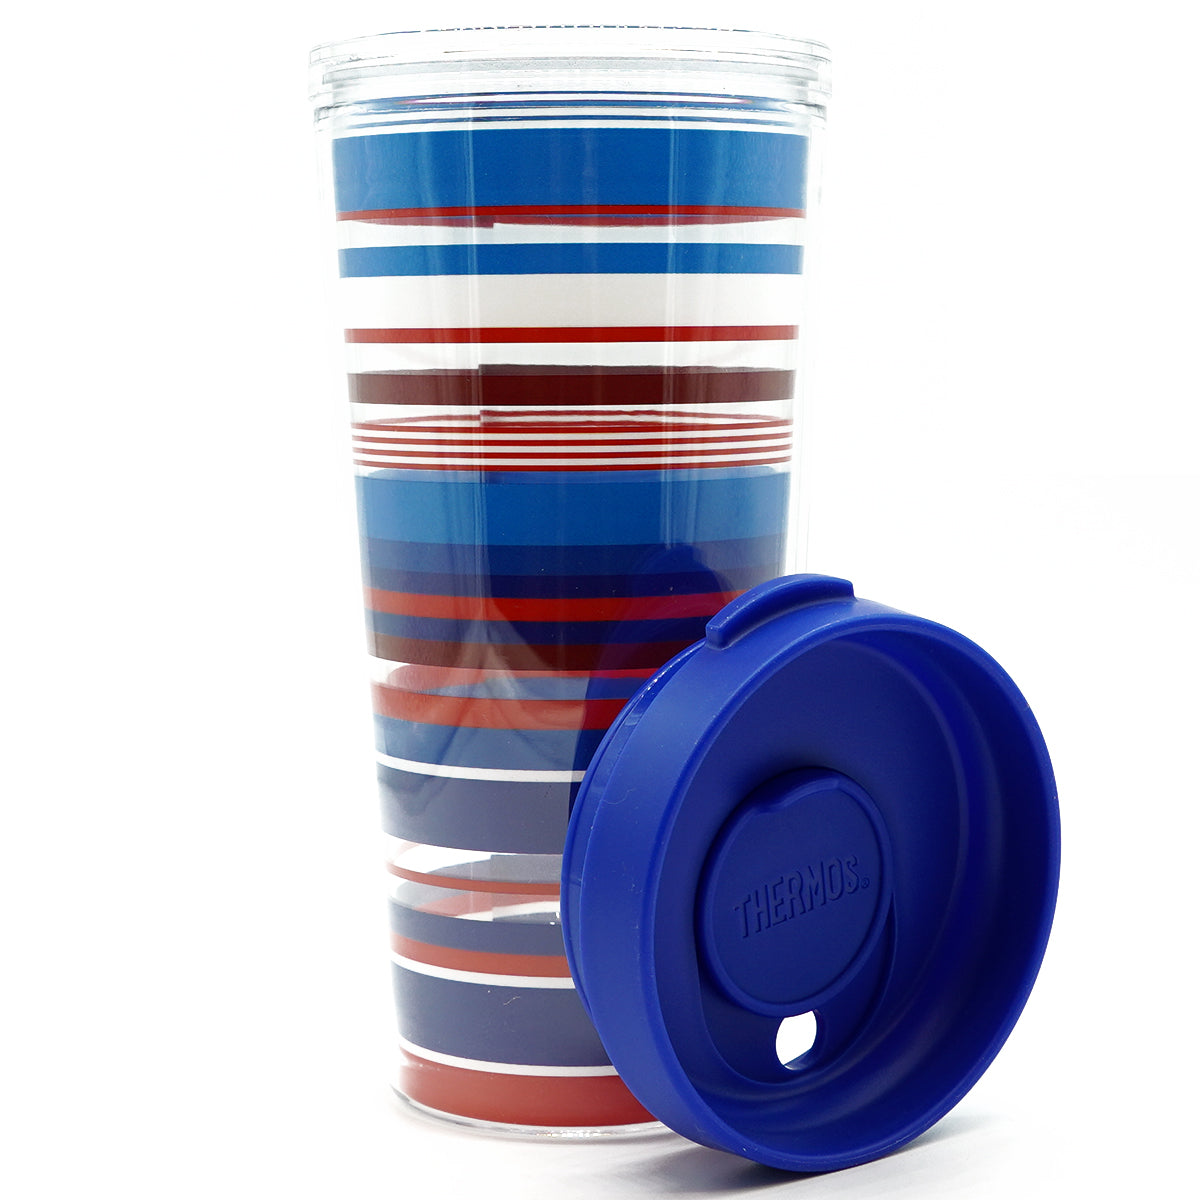 Thermos 16 oz. Insulated Double Wall Travel Tumbler with Lid - Stripes Thermos